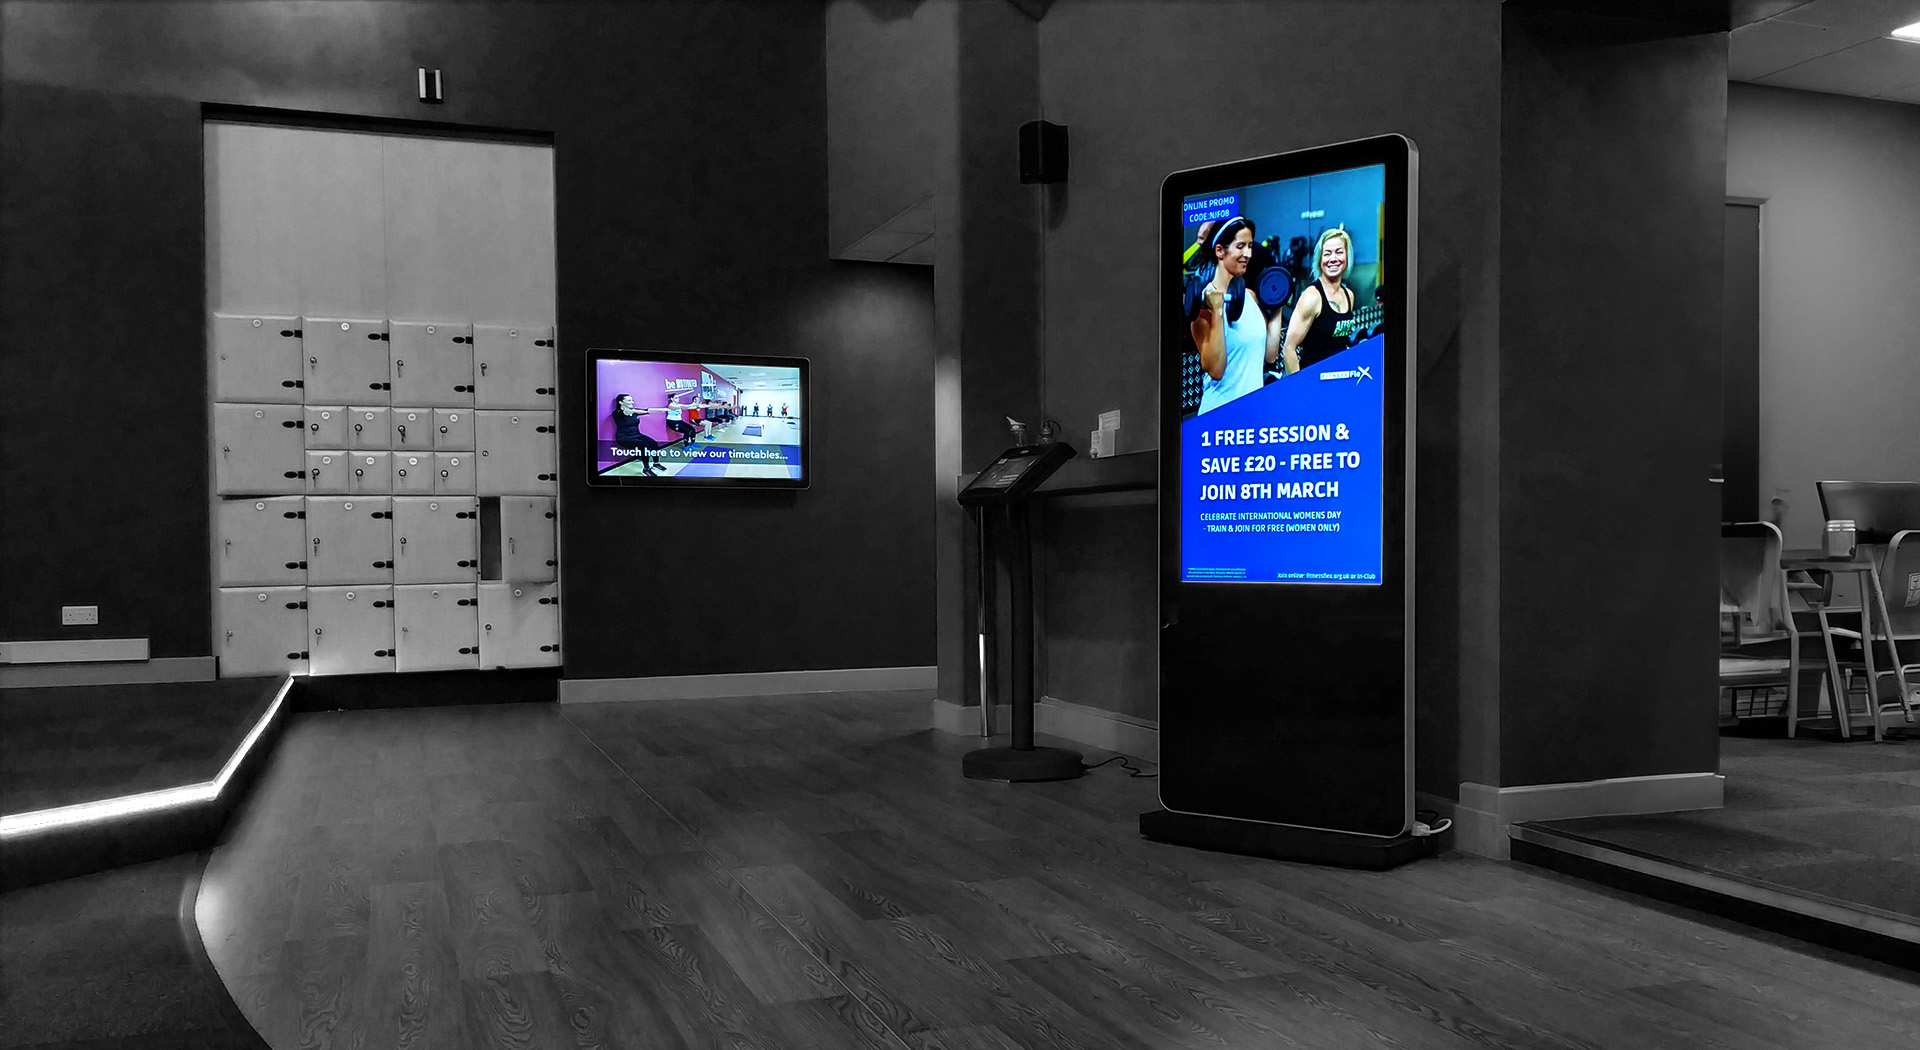 embed signage digital signage software - barnsley premier leisure BPL - touch screen and totem gym fitness leisure digital signage